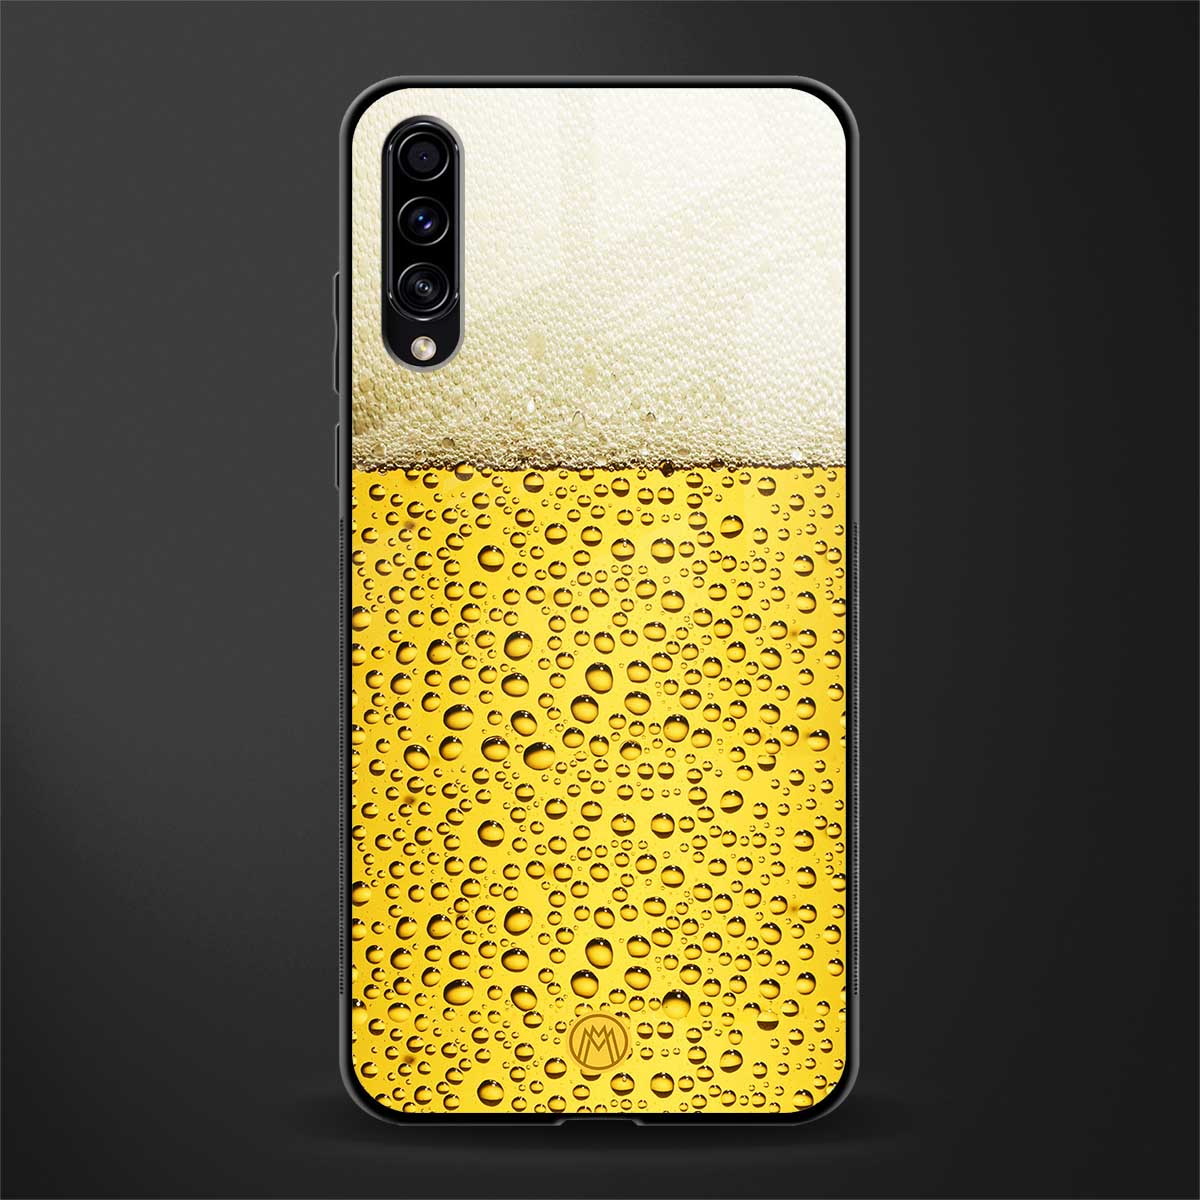 fizzy beer glass case for samsung galaxy a50s image